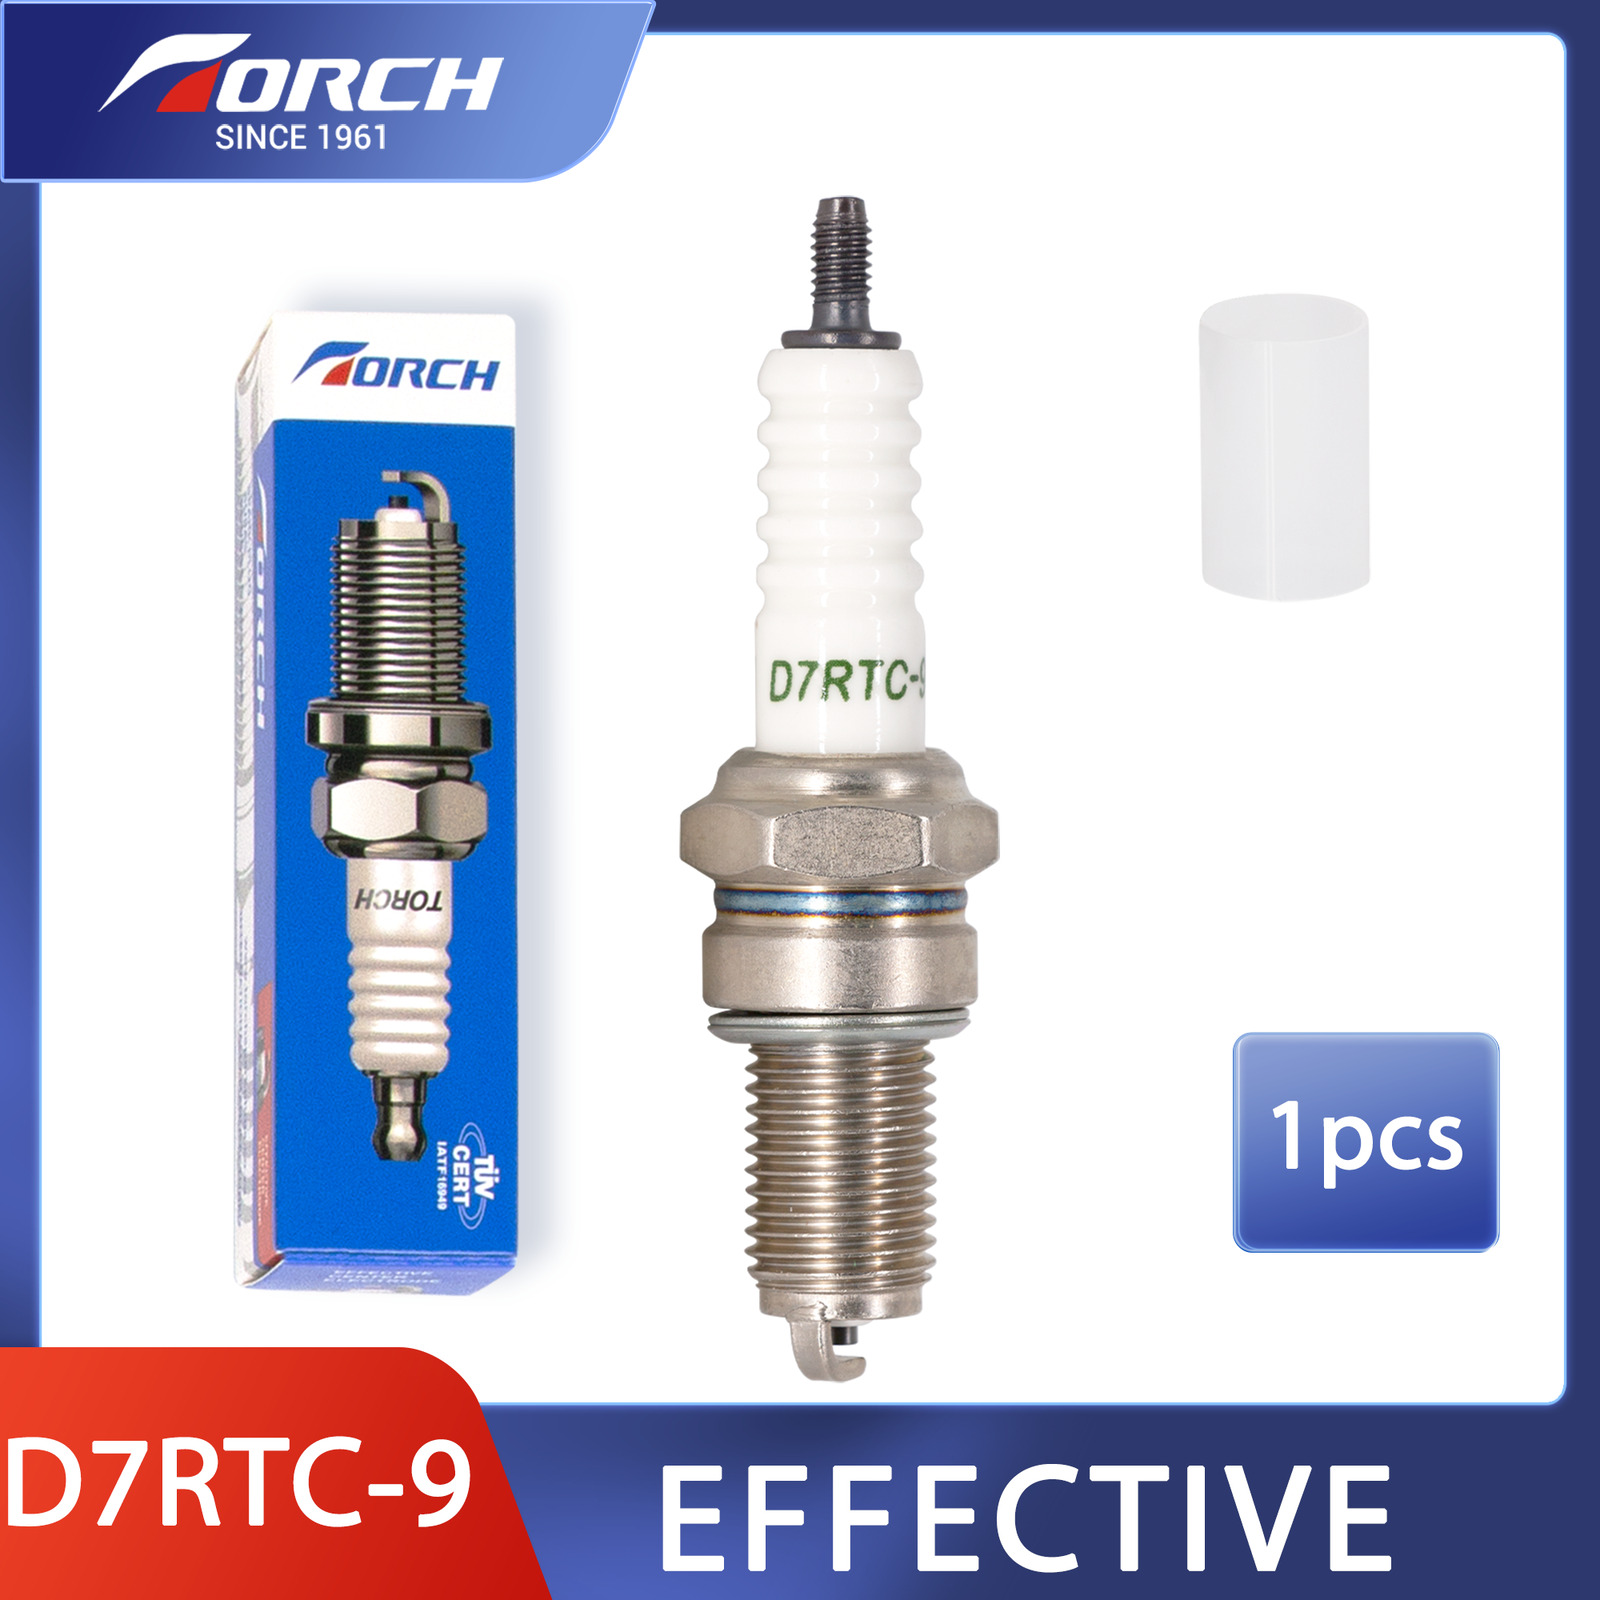 TORCH D7RTC-9 Spark Plug Replacement for HONDA 98069-57916 for NGK DPR7EA-9